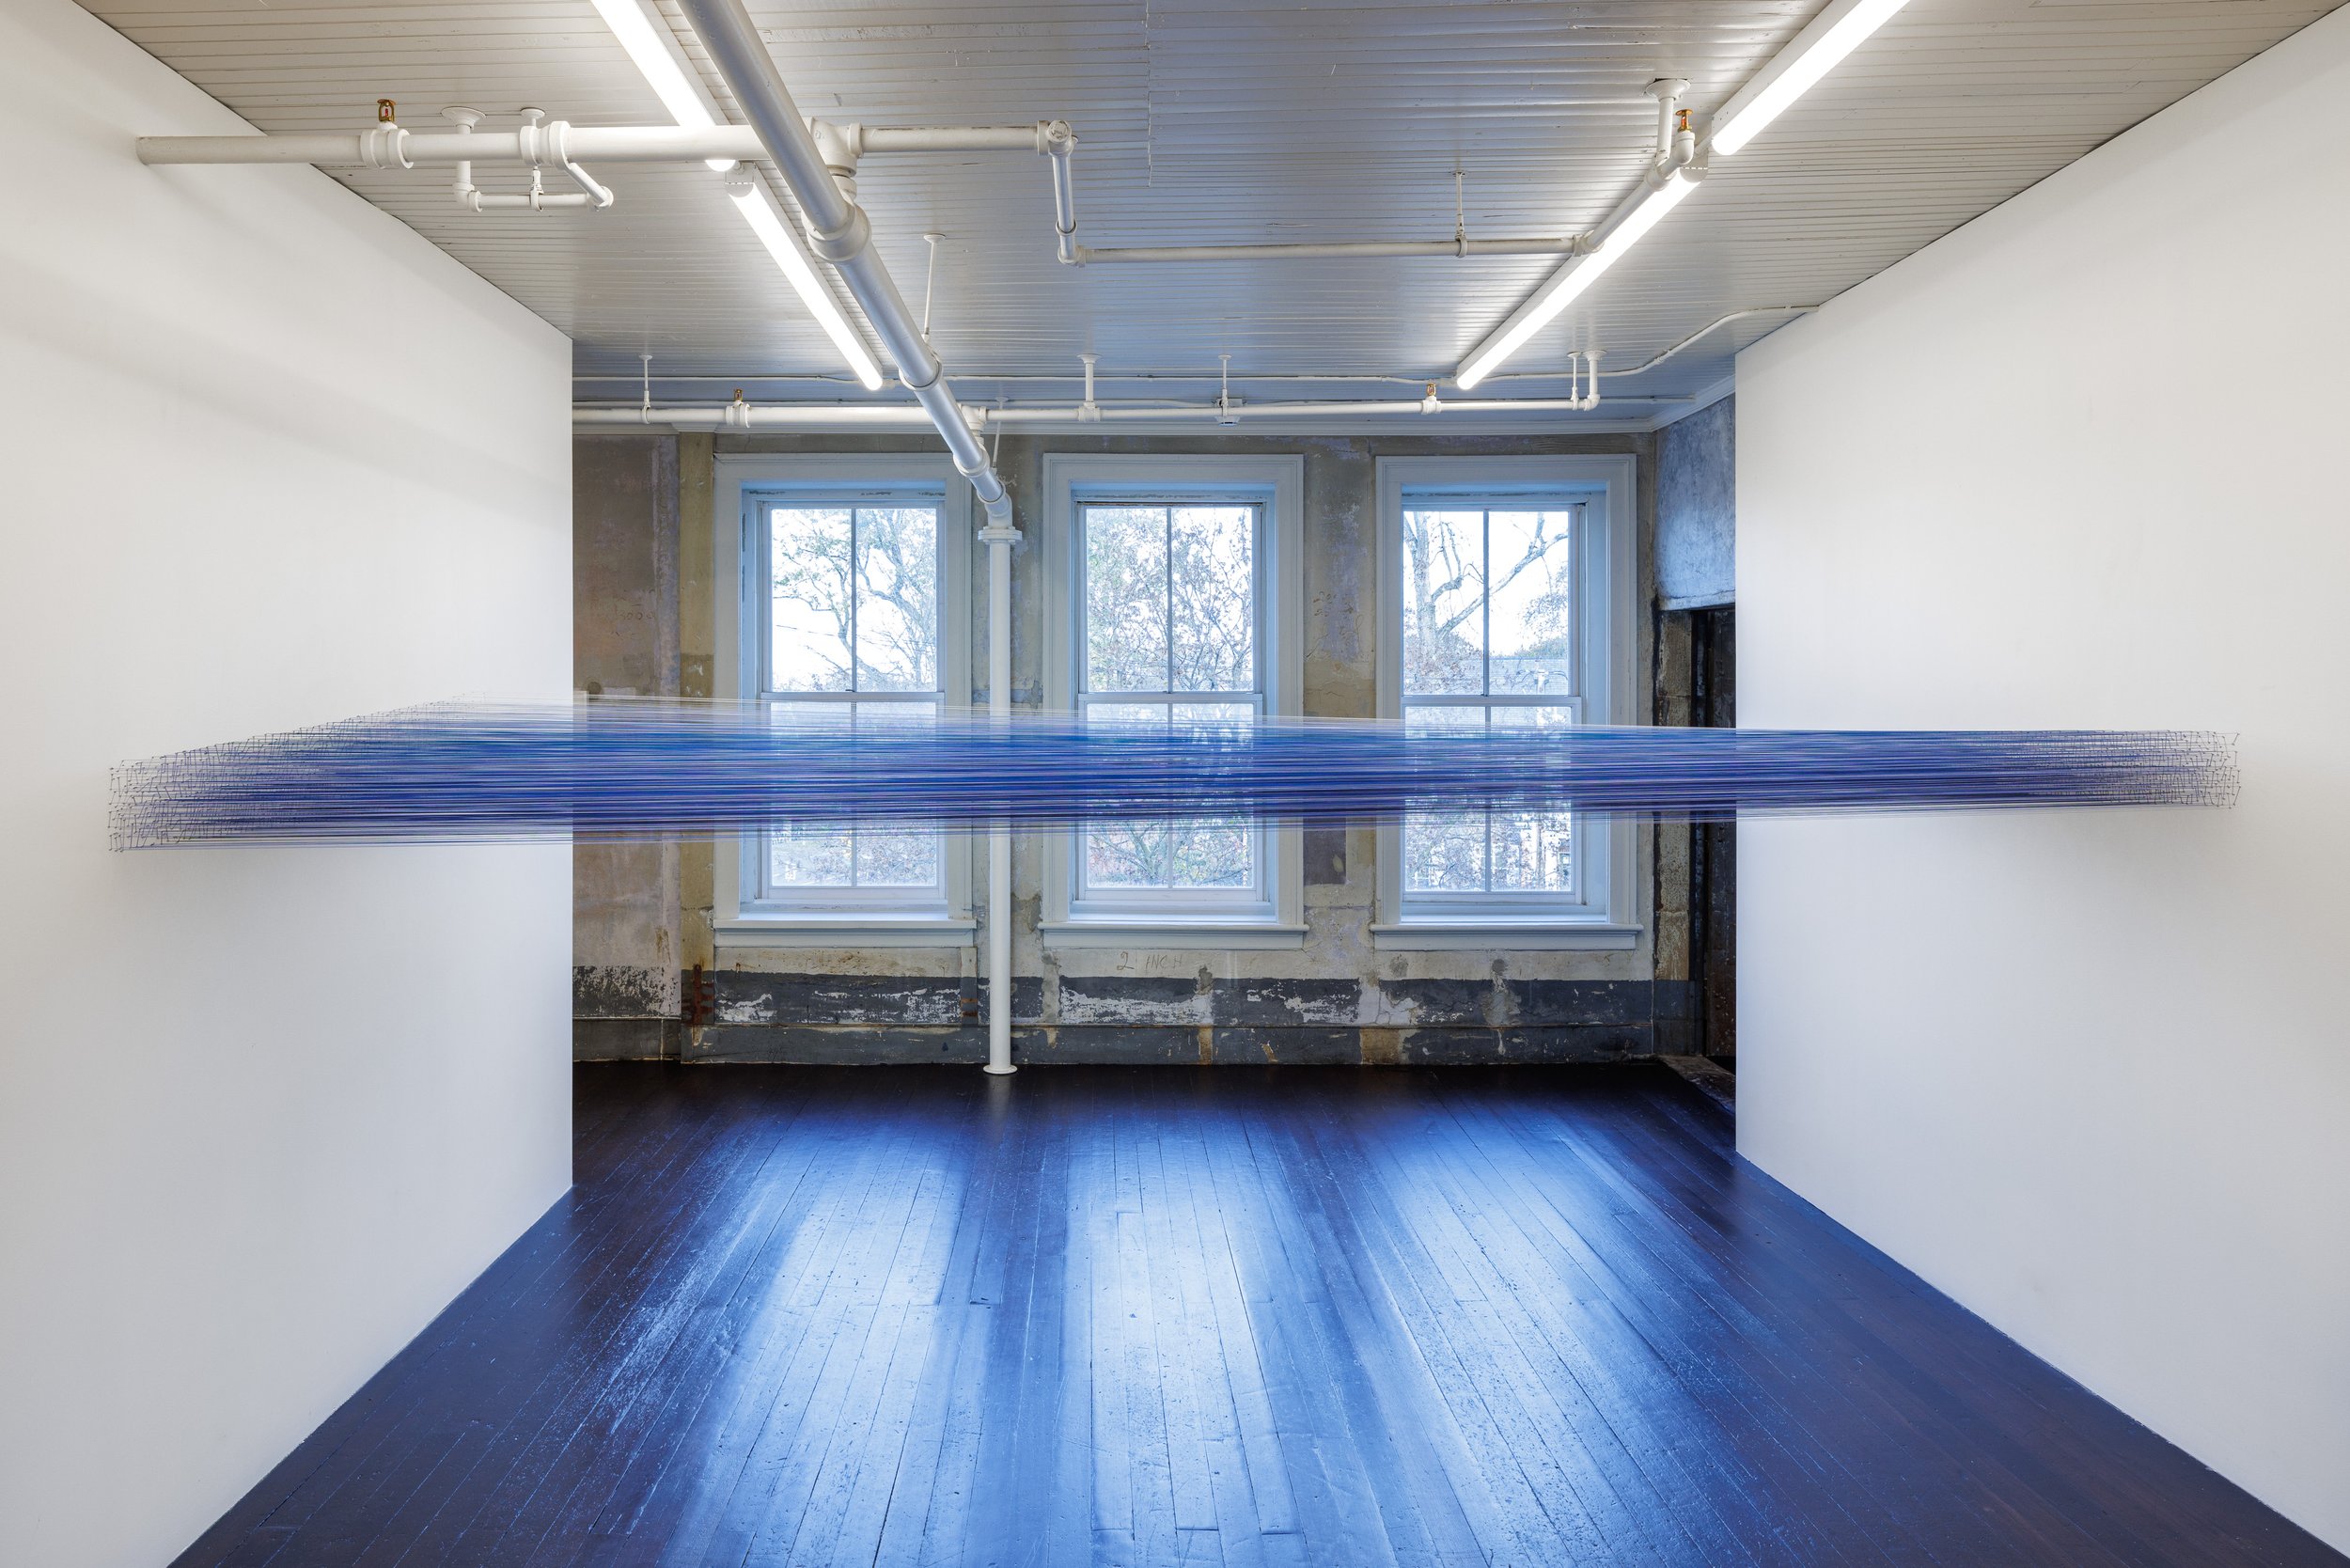    horizon   cotton thread and staples 12 inches x 72 inches x 14 feet  site-specific installation photography by Alon Koppel 